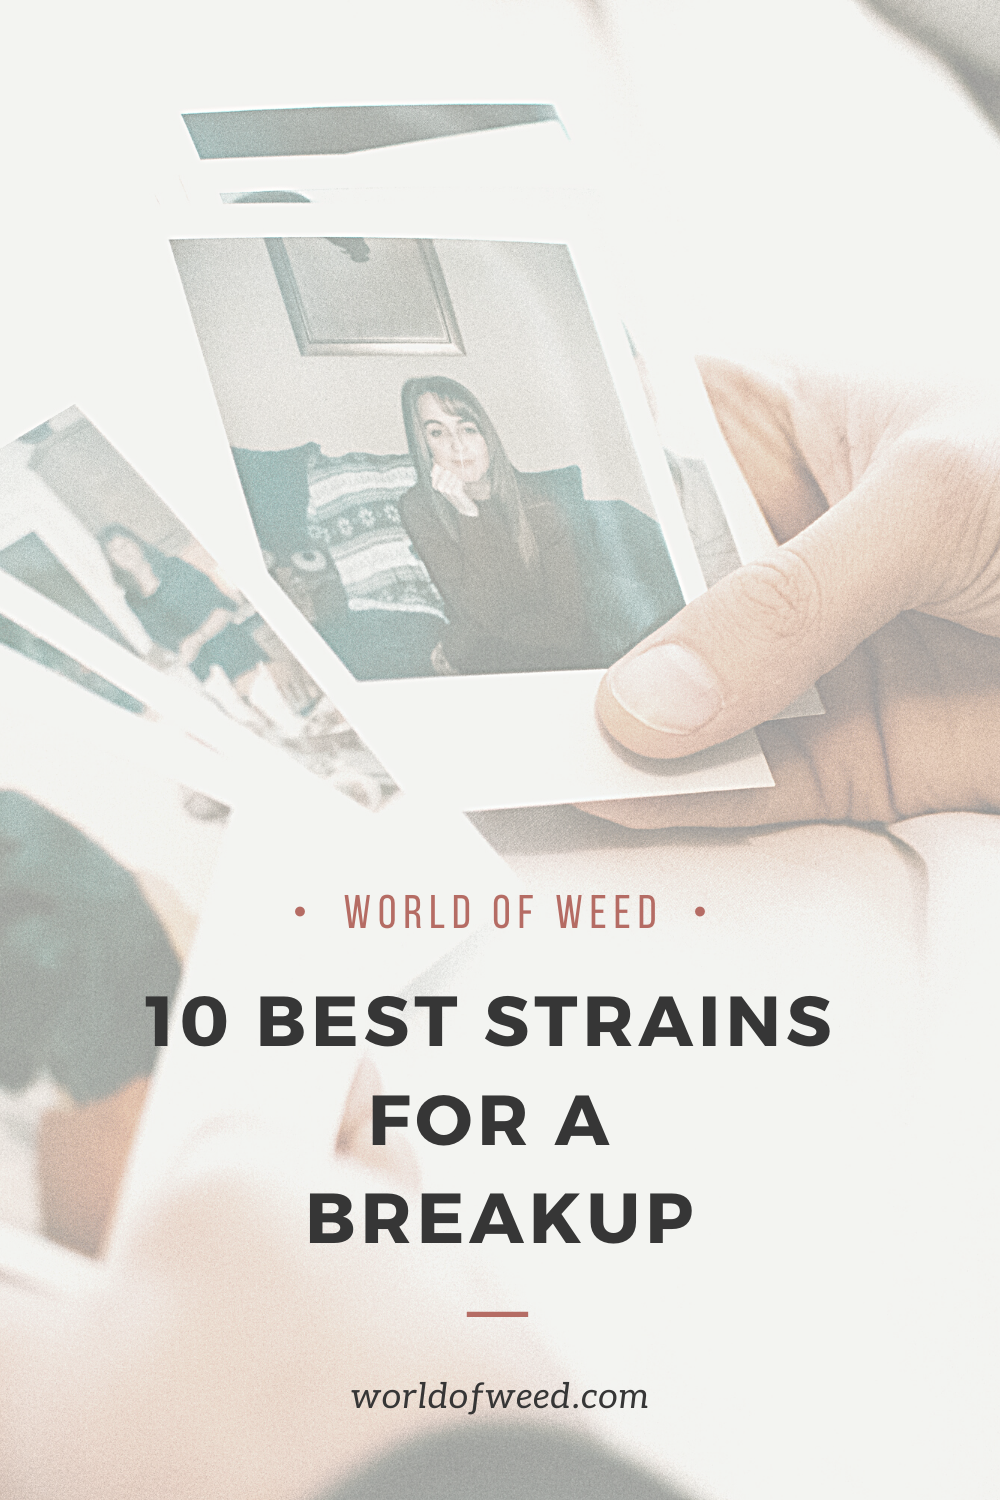 The 10 Best Strains for a Breakup